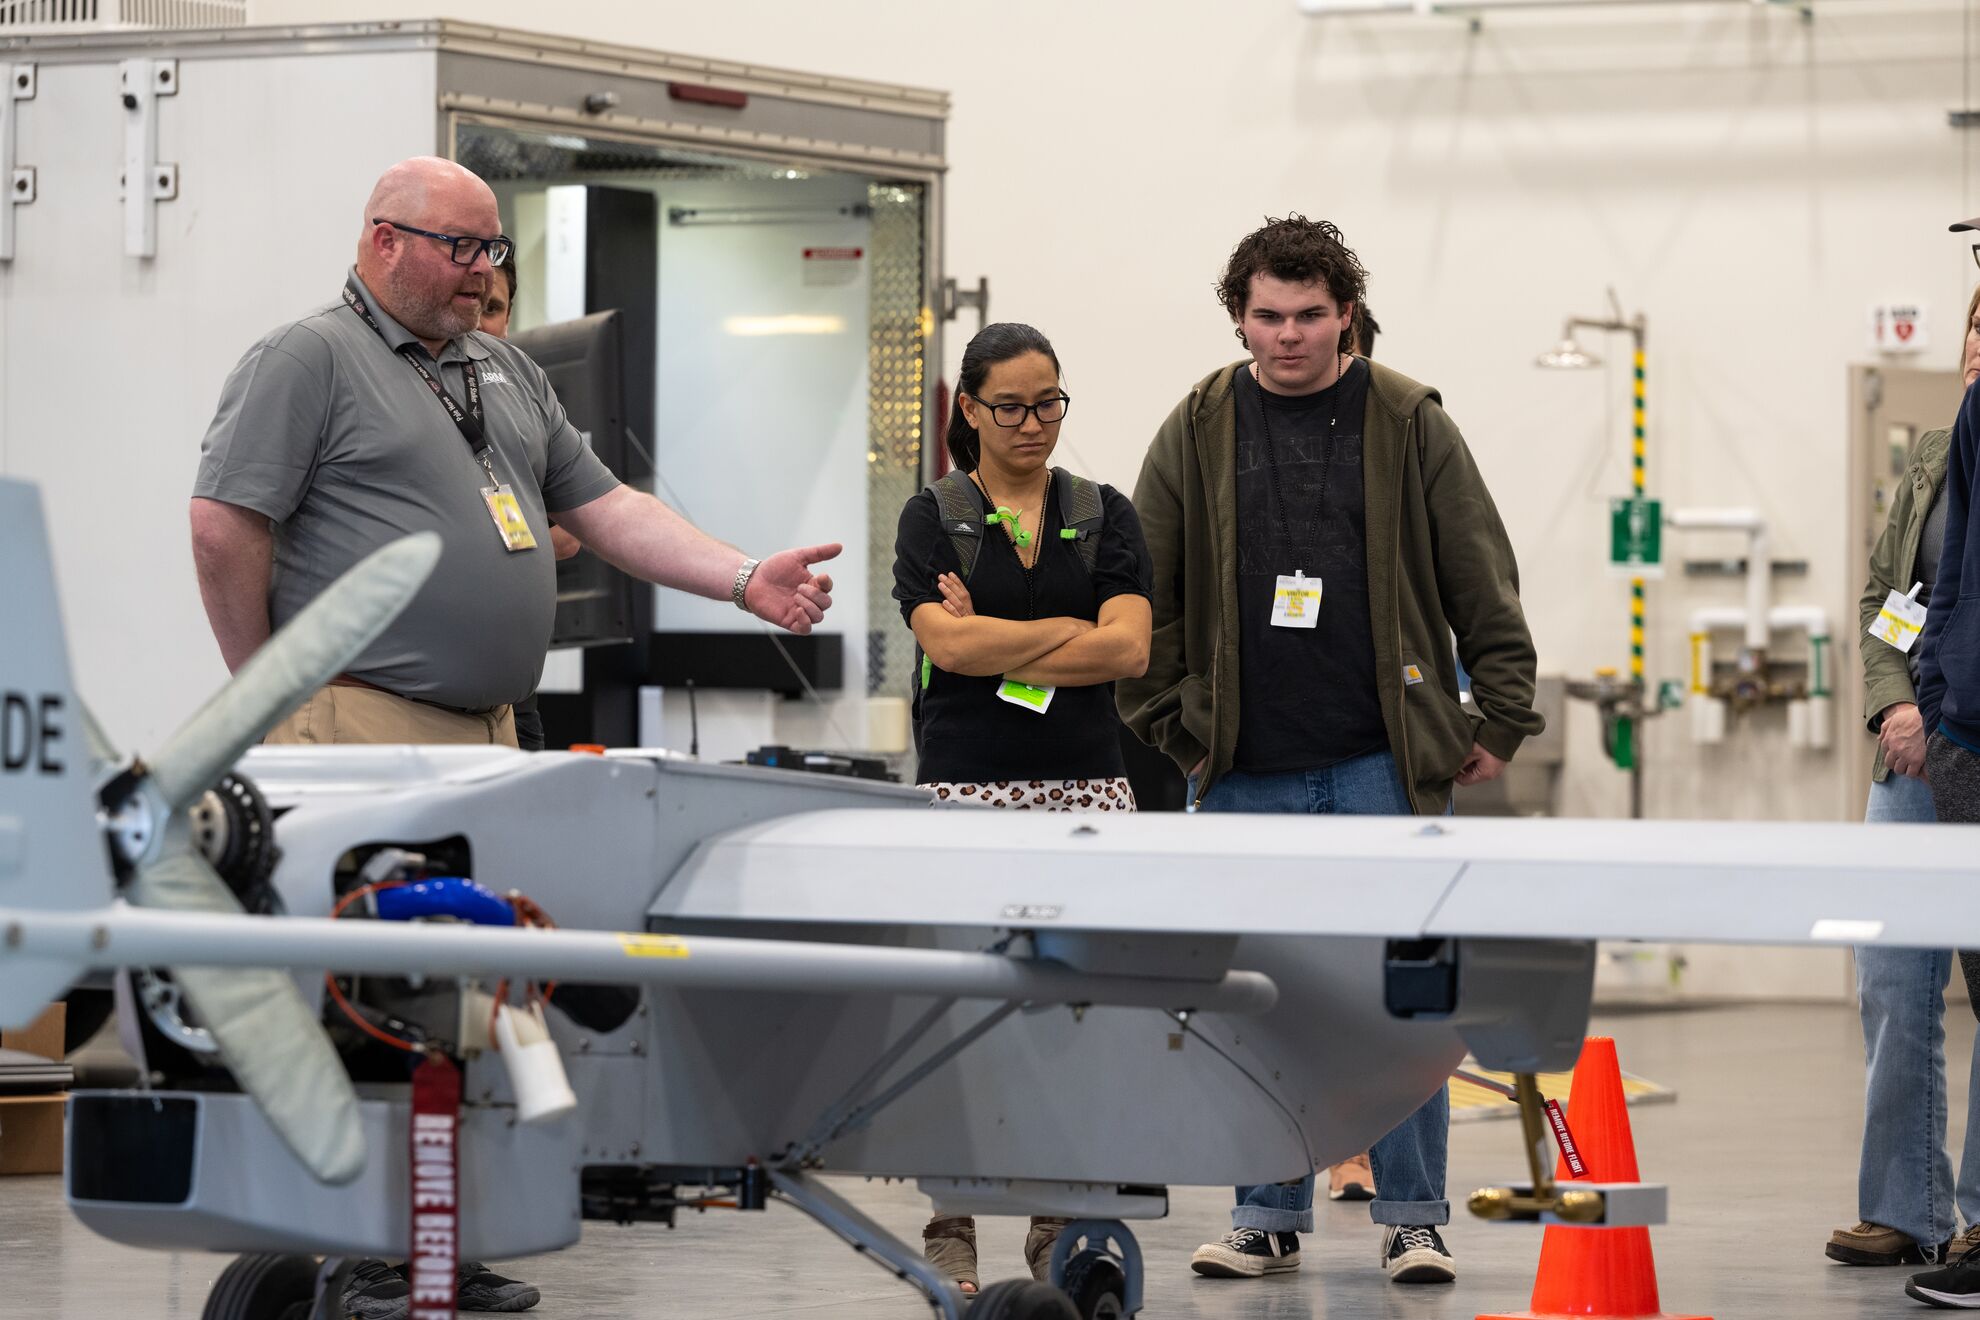 Pete Carroll, the uncrewed aerial system operations lead for the ARM Aerial Facility, shows the payload bay of the ArcticShark to a Blue Mountain Community College instructor and student. Photo is by Andrea Starr, Pacific Northwest National Laboratory.